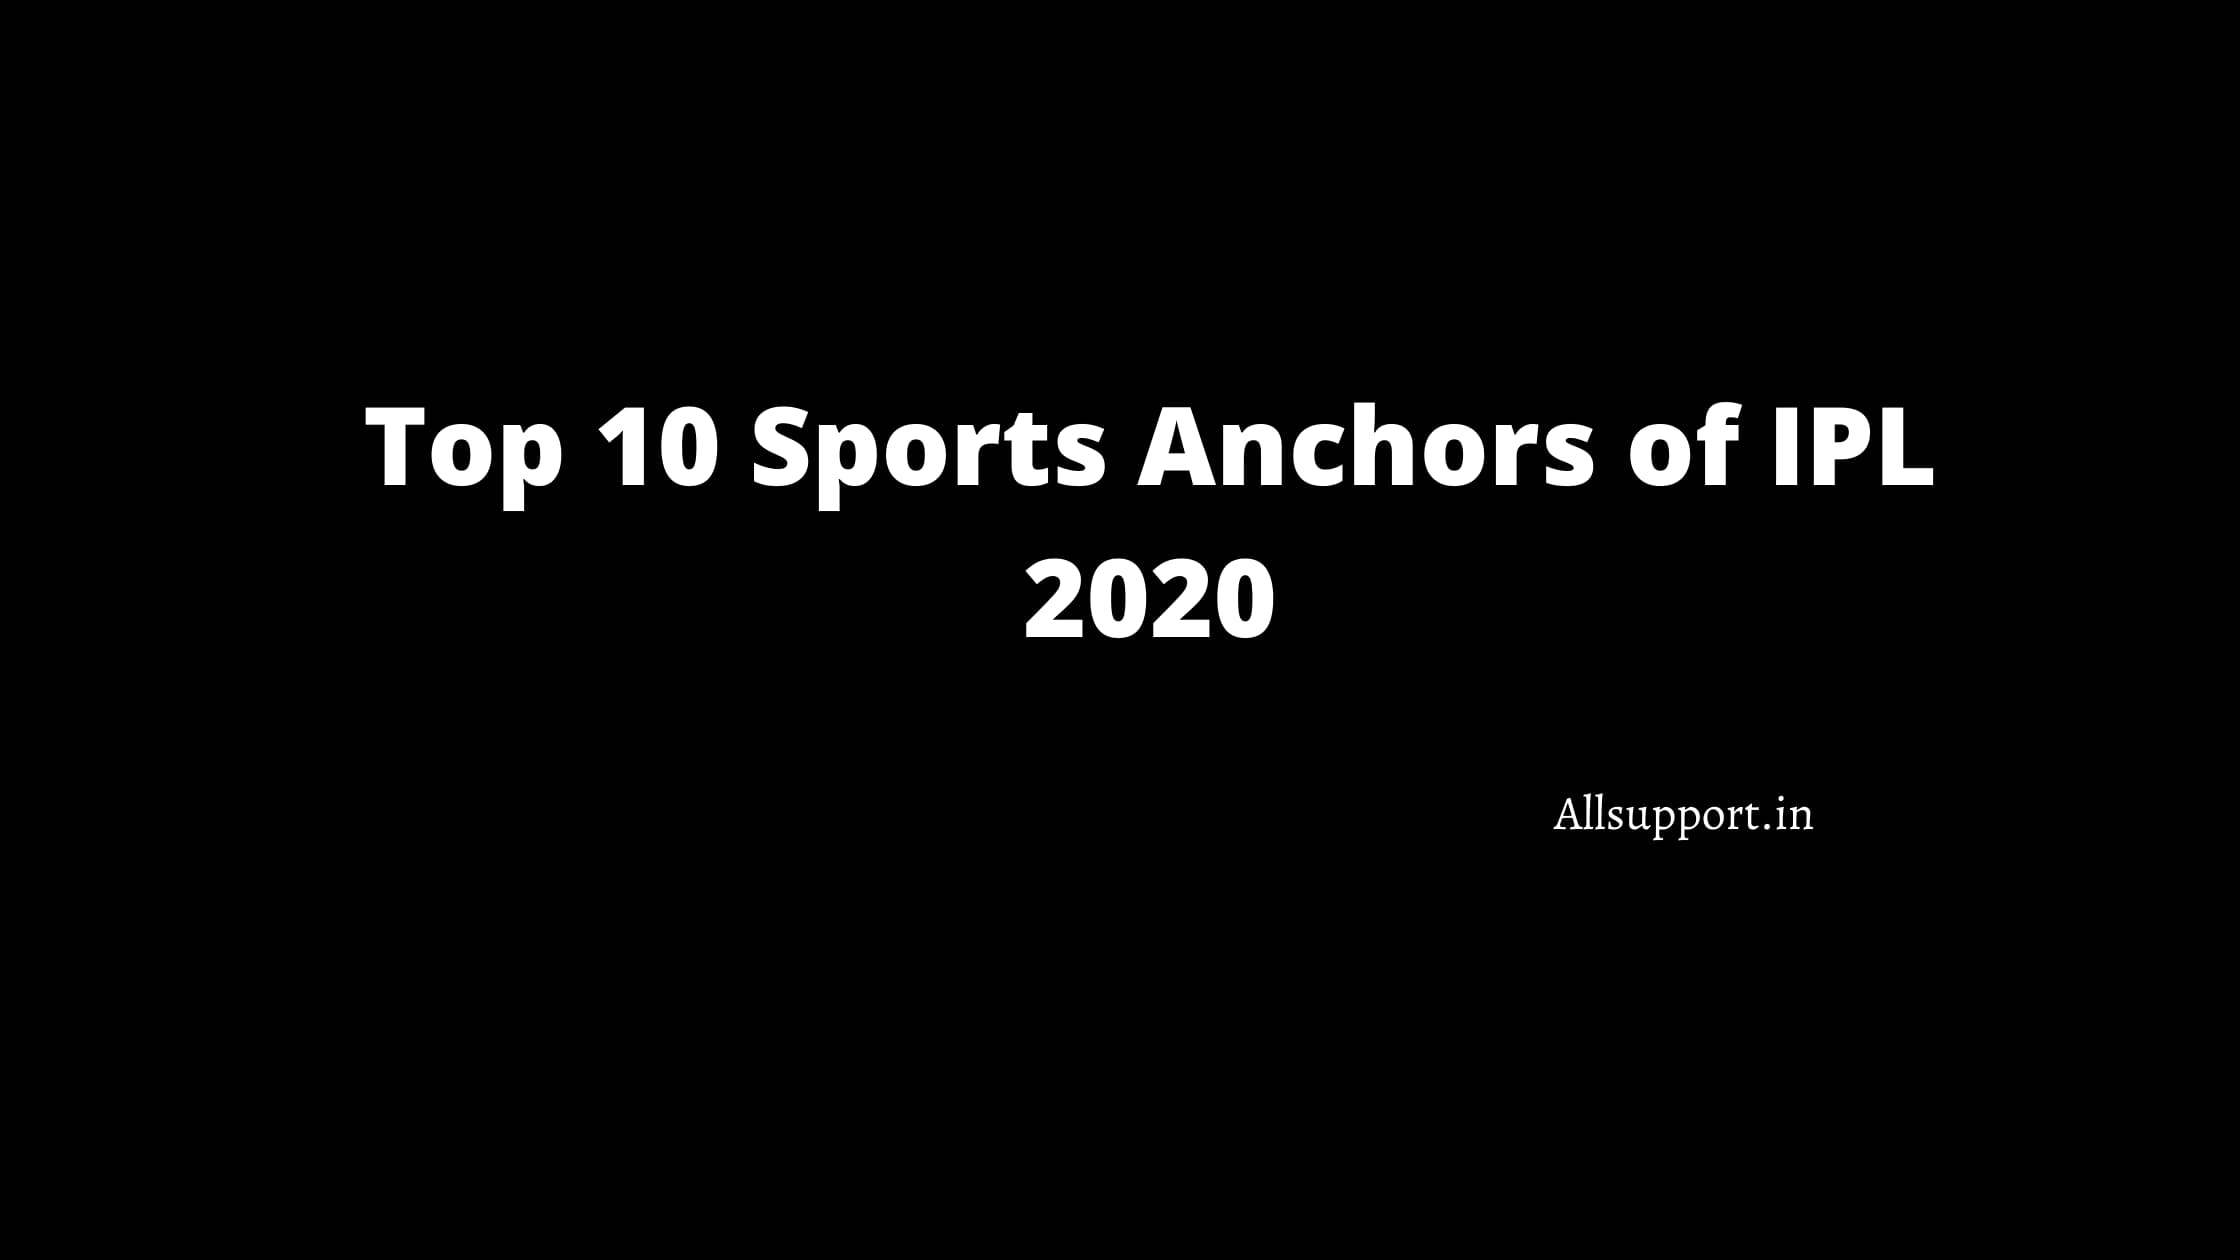 Top 10 Sports Anchors of IPL 2020